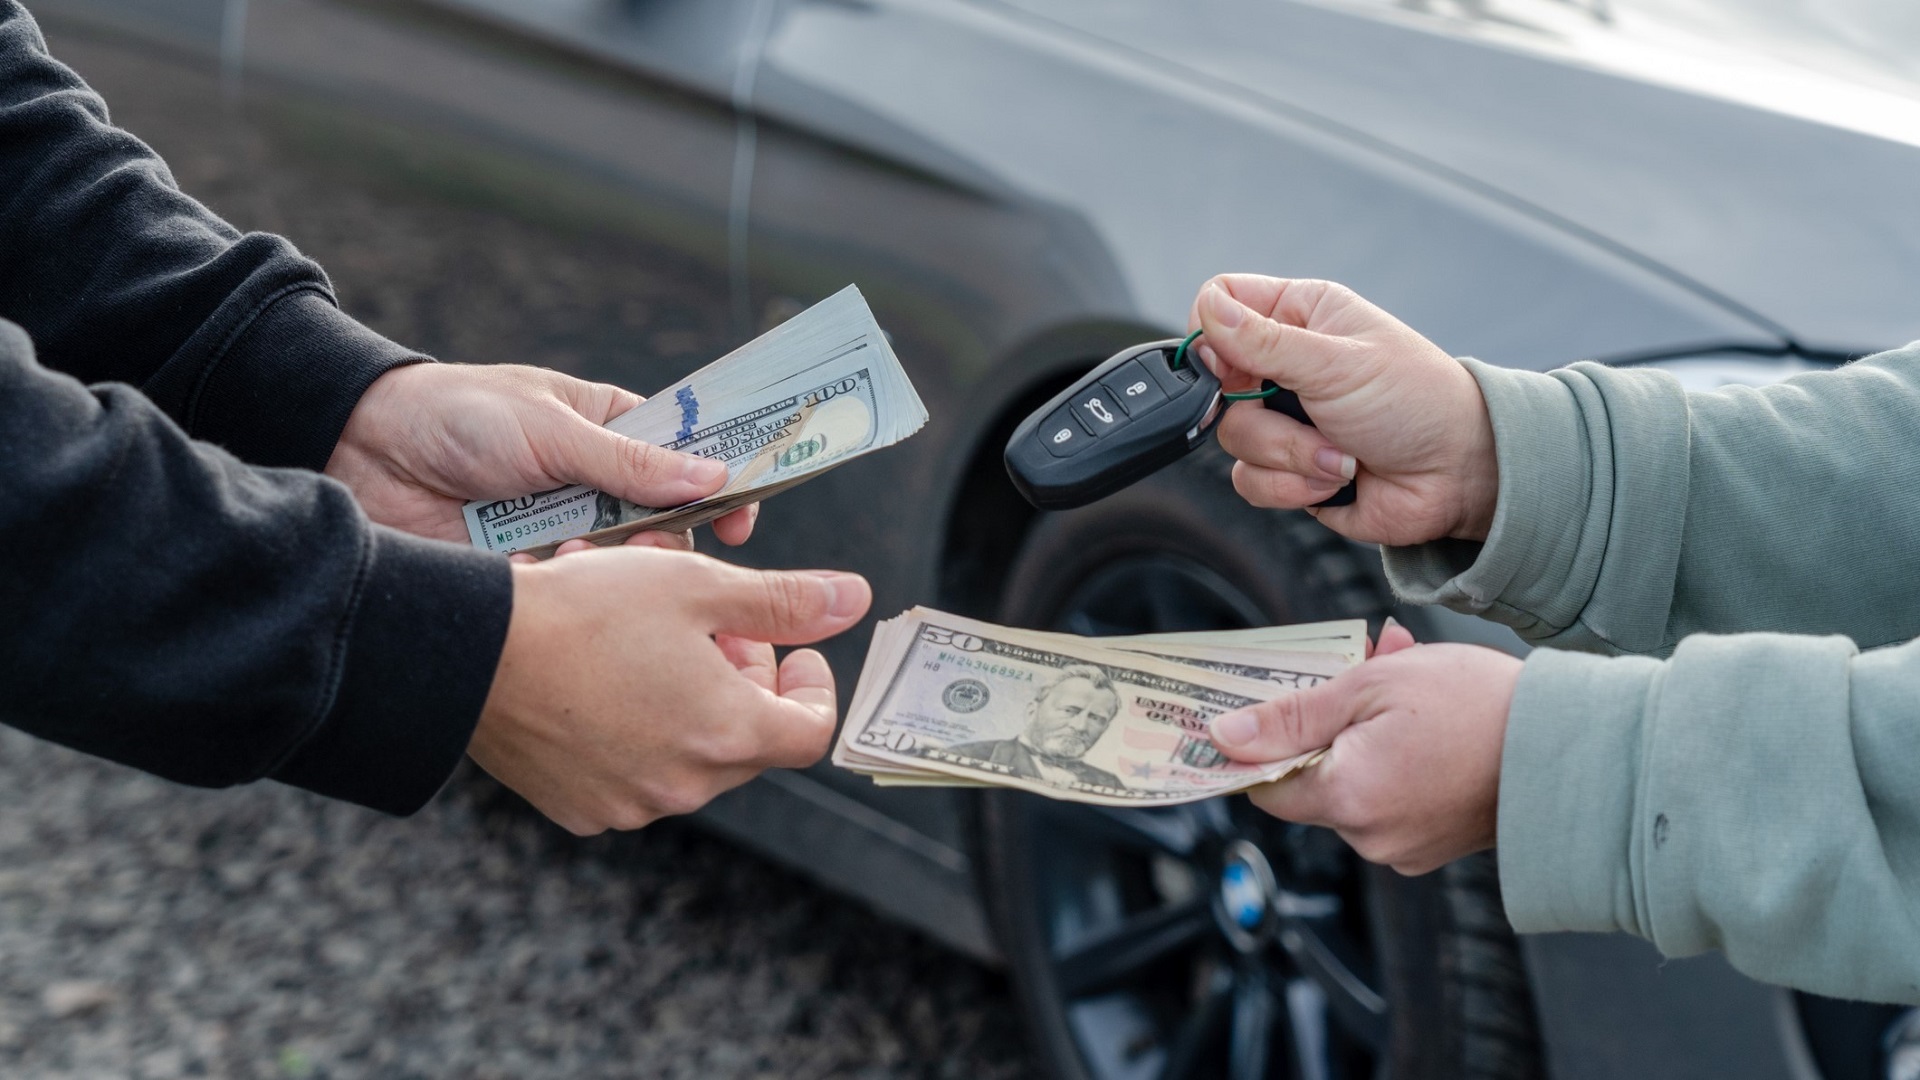 10 ways you’re spending too much money on your car without realizing it